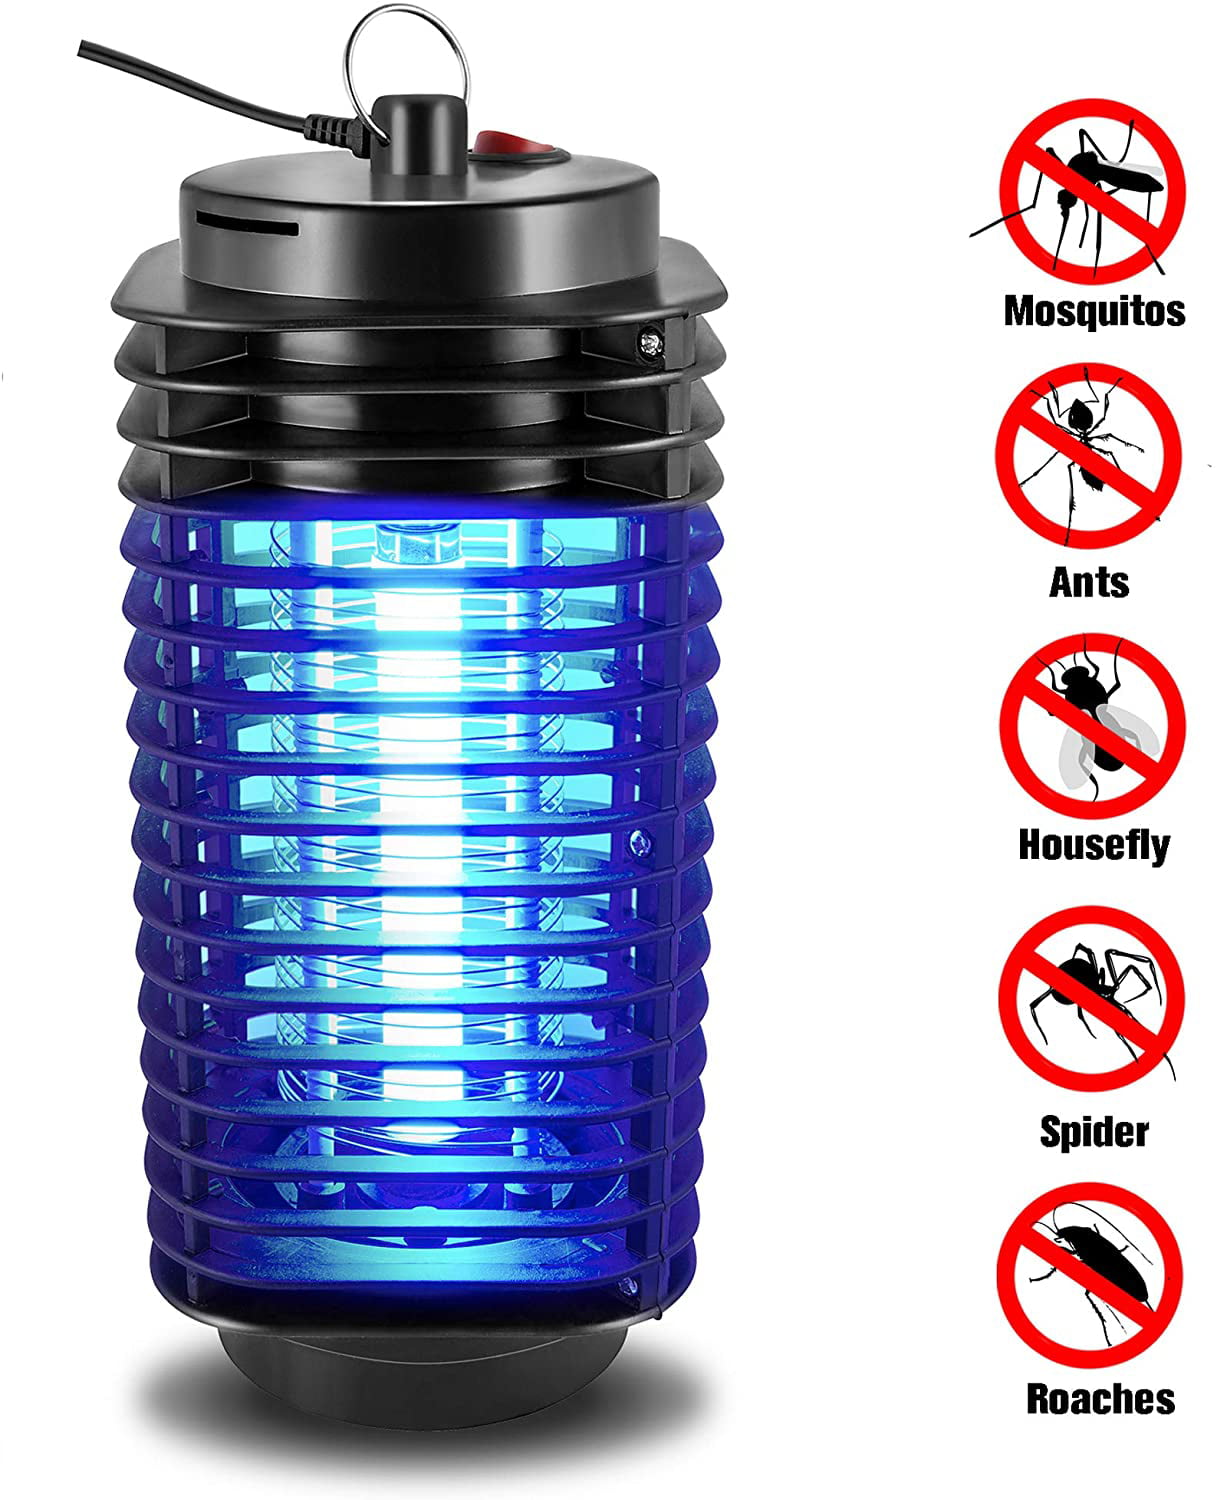 Details about   2X Electric LED Mosquito Fly Bug Insect Trap Zapper Killer Night Light Lamp NEW 